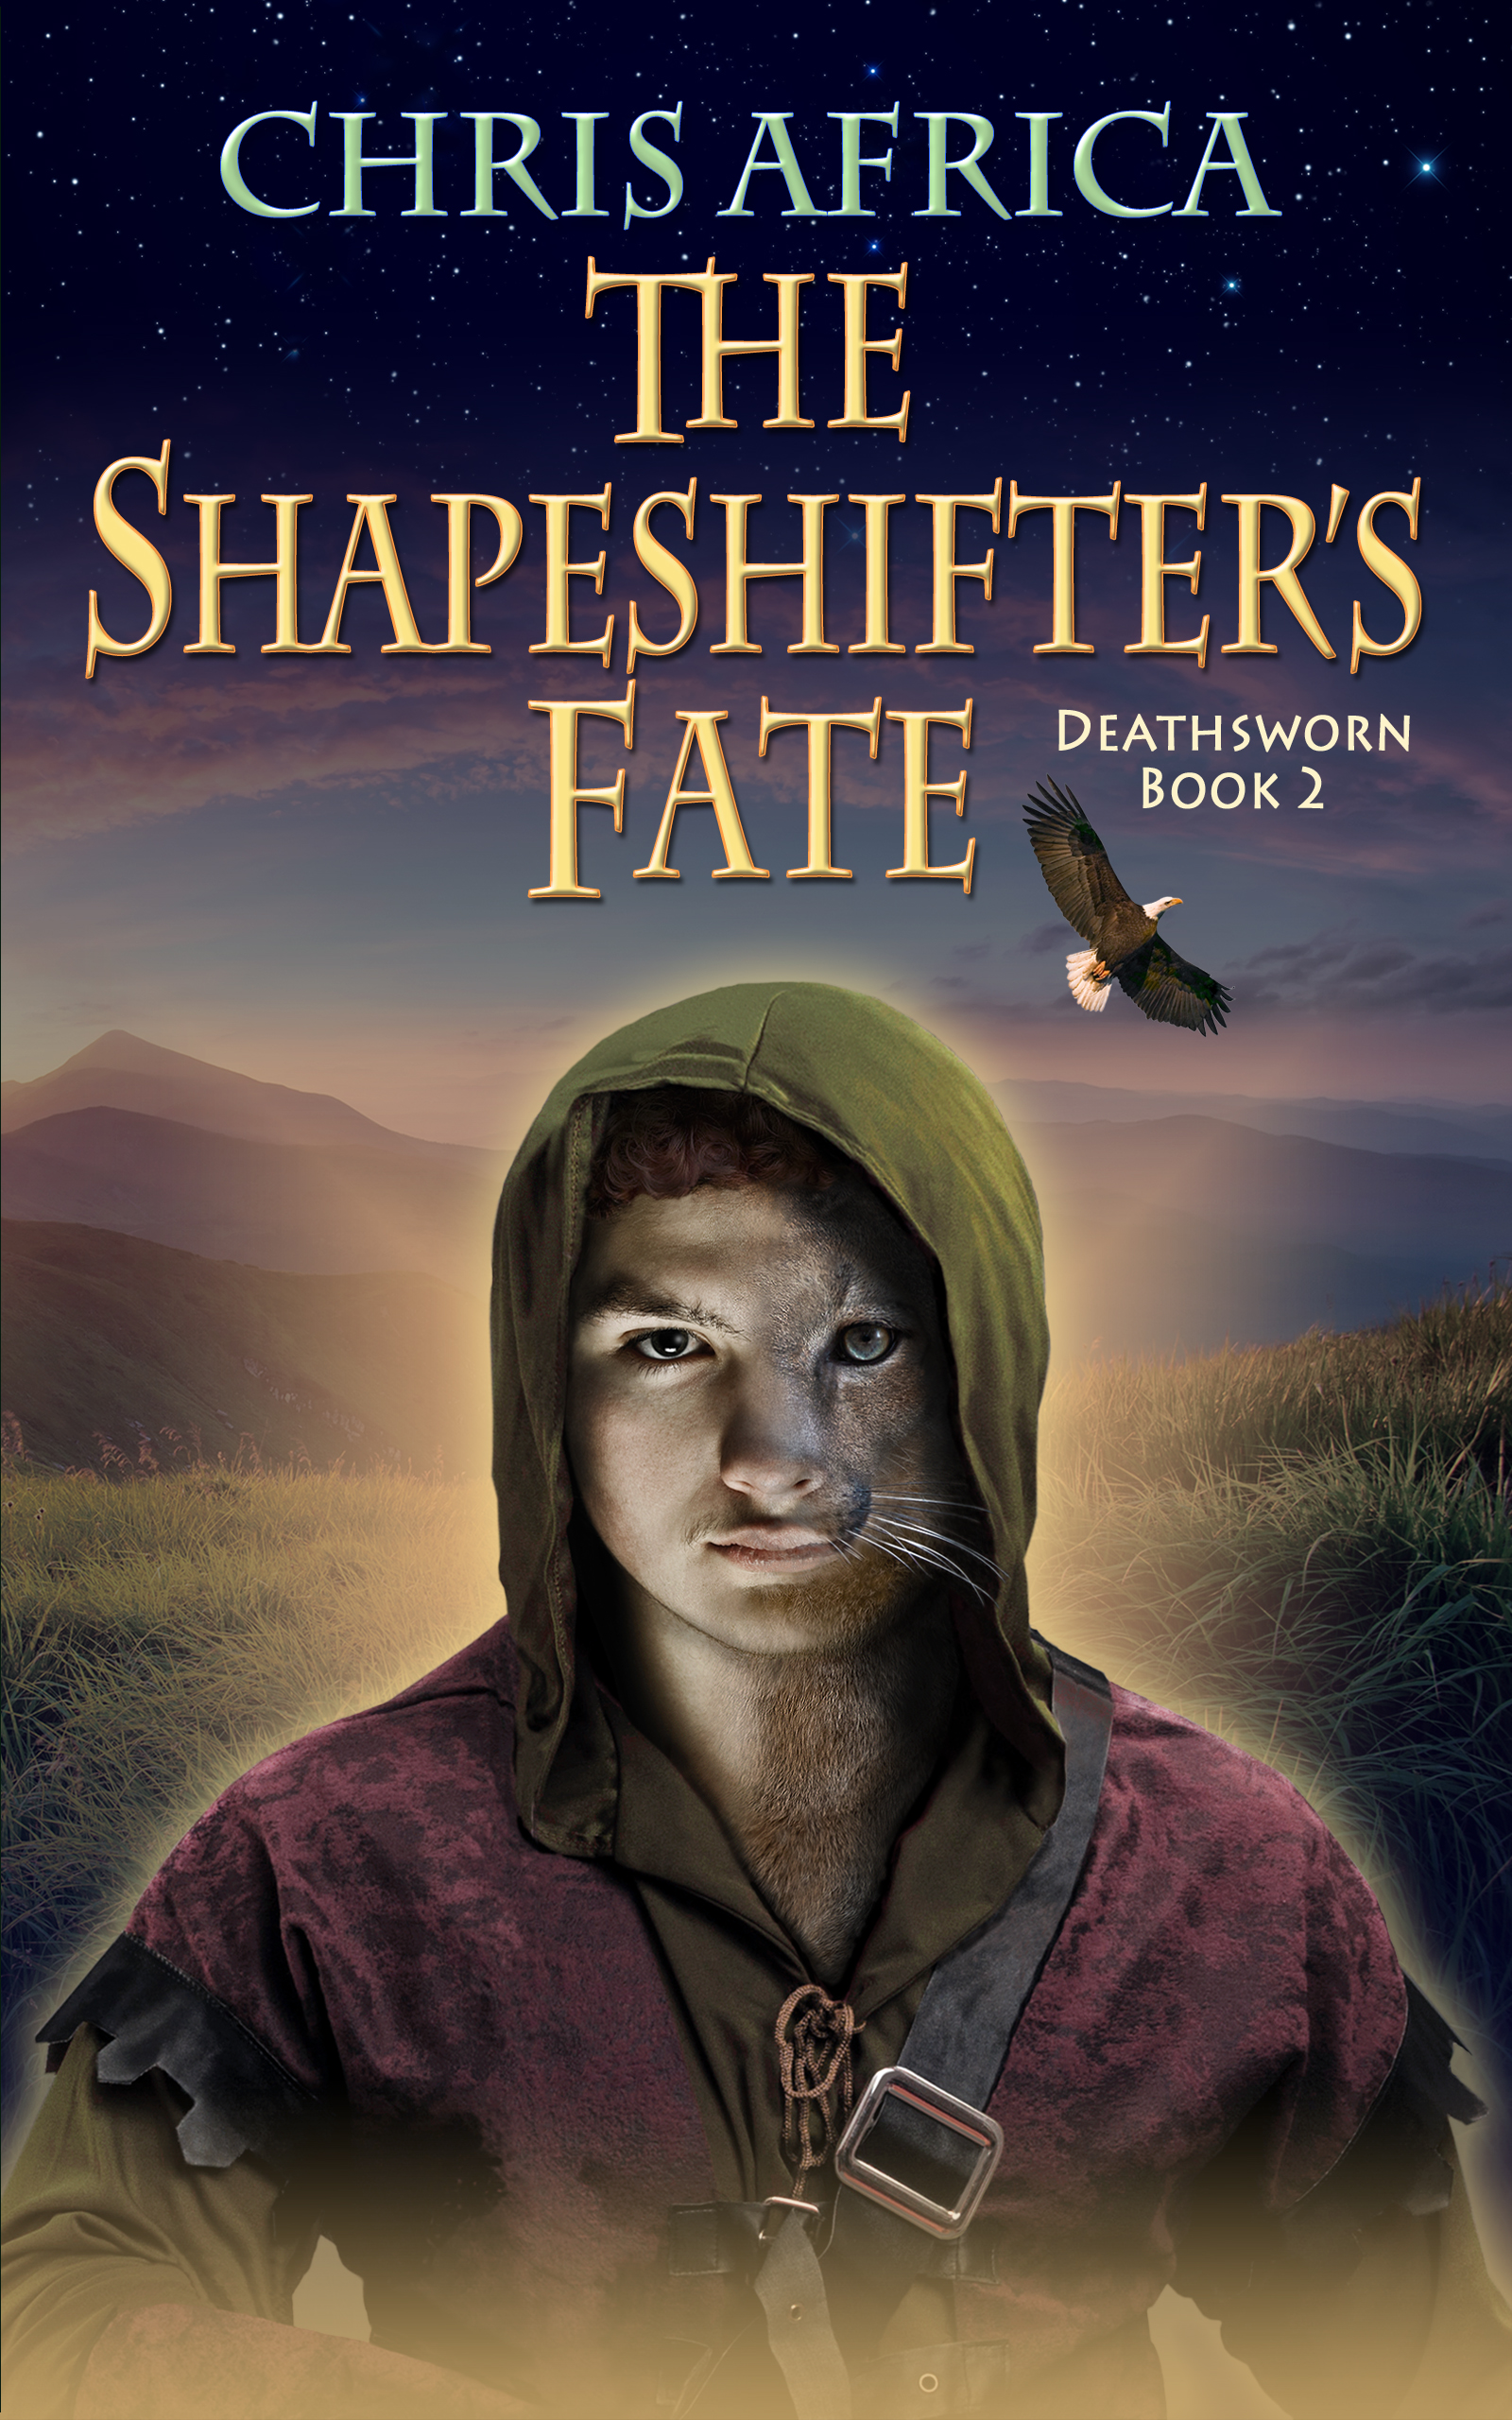 FREE: The Shapeshifter’s Fate by Chris Africa